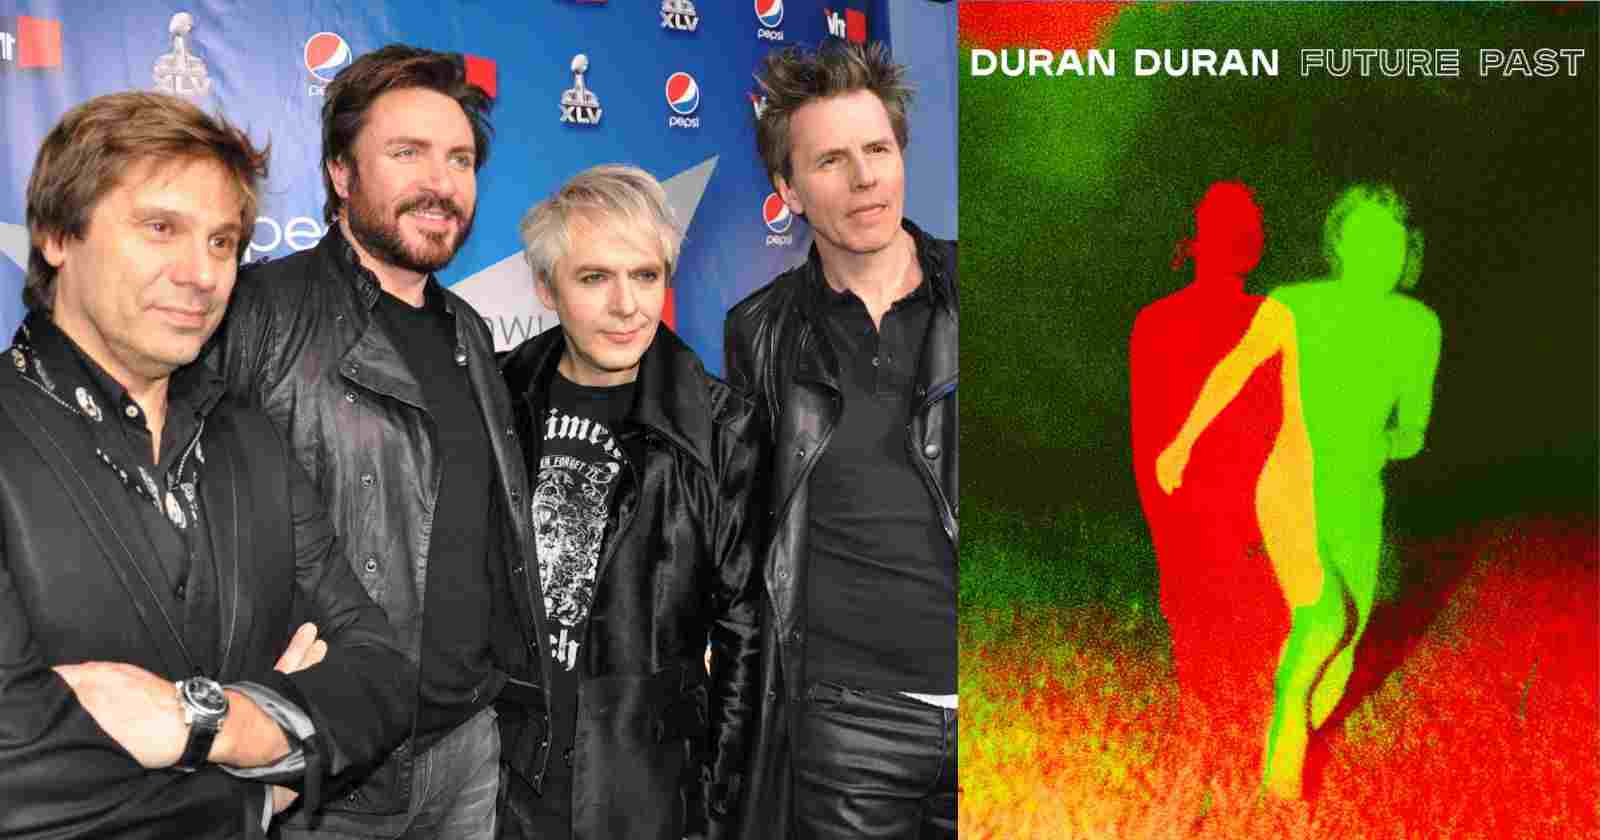 Duran Duran announces new album and releaseas first song "Invisible"